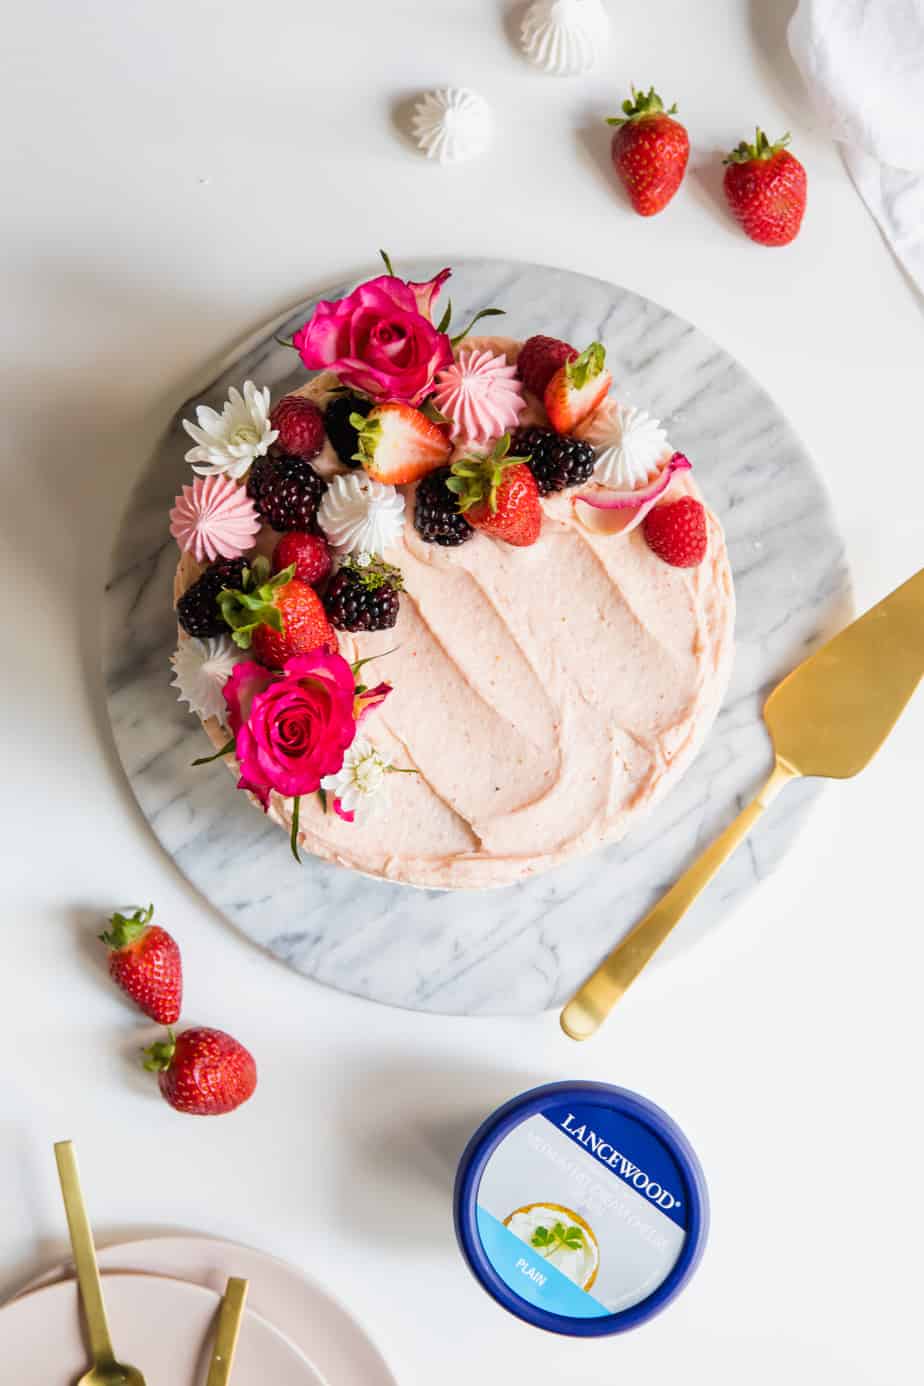 Win a trip to New York worth R150 000 with Lancewood Cheese and use this Chocolate Cake with Strawberry Cream Cheese Frosting recipe as inspiration for your decadent creations!